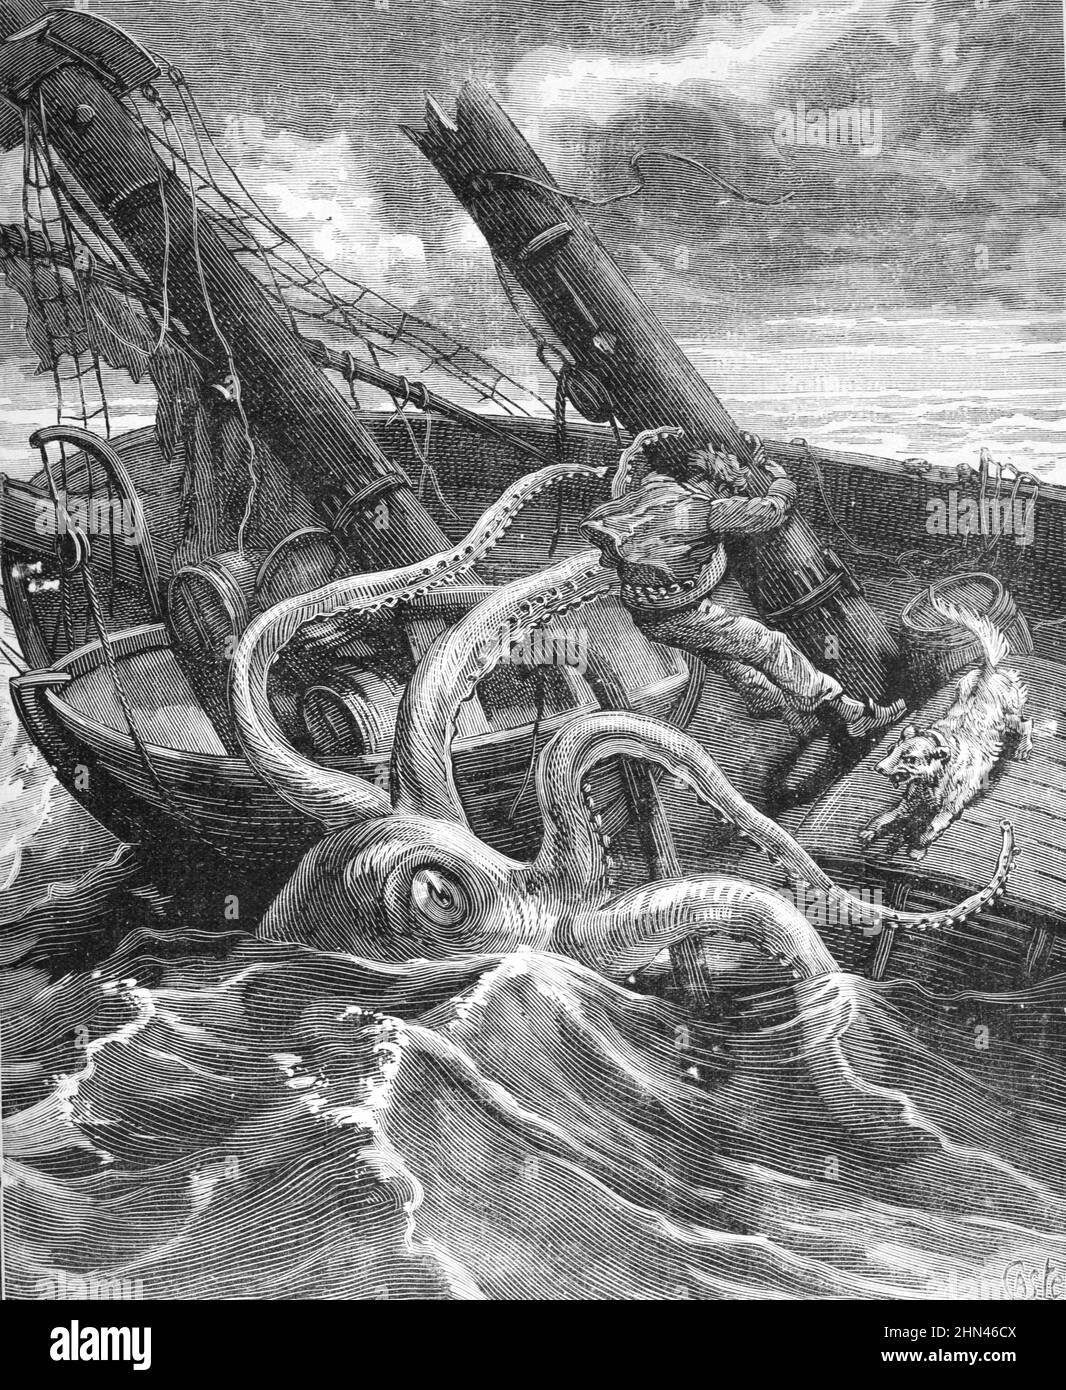 Giant Squid or Octopus Attacking Sailing Boat in the Atlantic Ocean. Vintage Illustration or Engraving 1881 (Castelli) Stock Photo